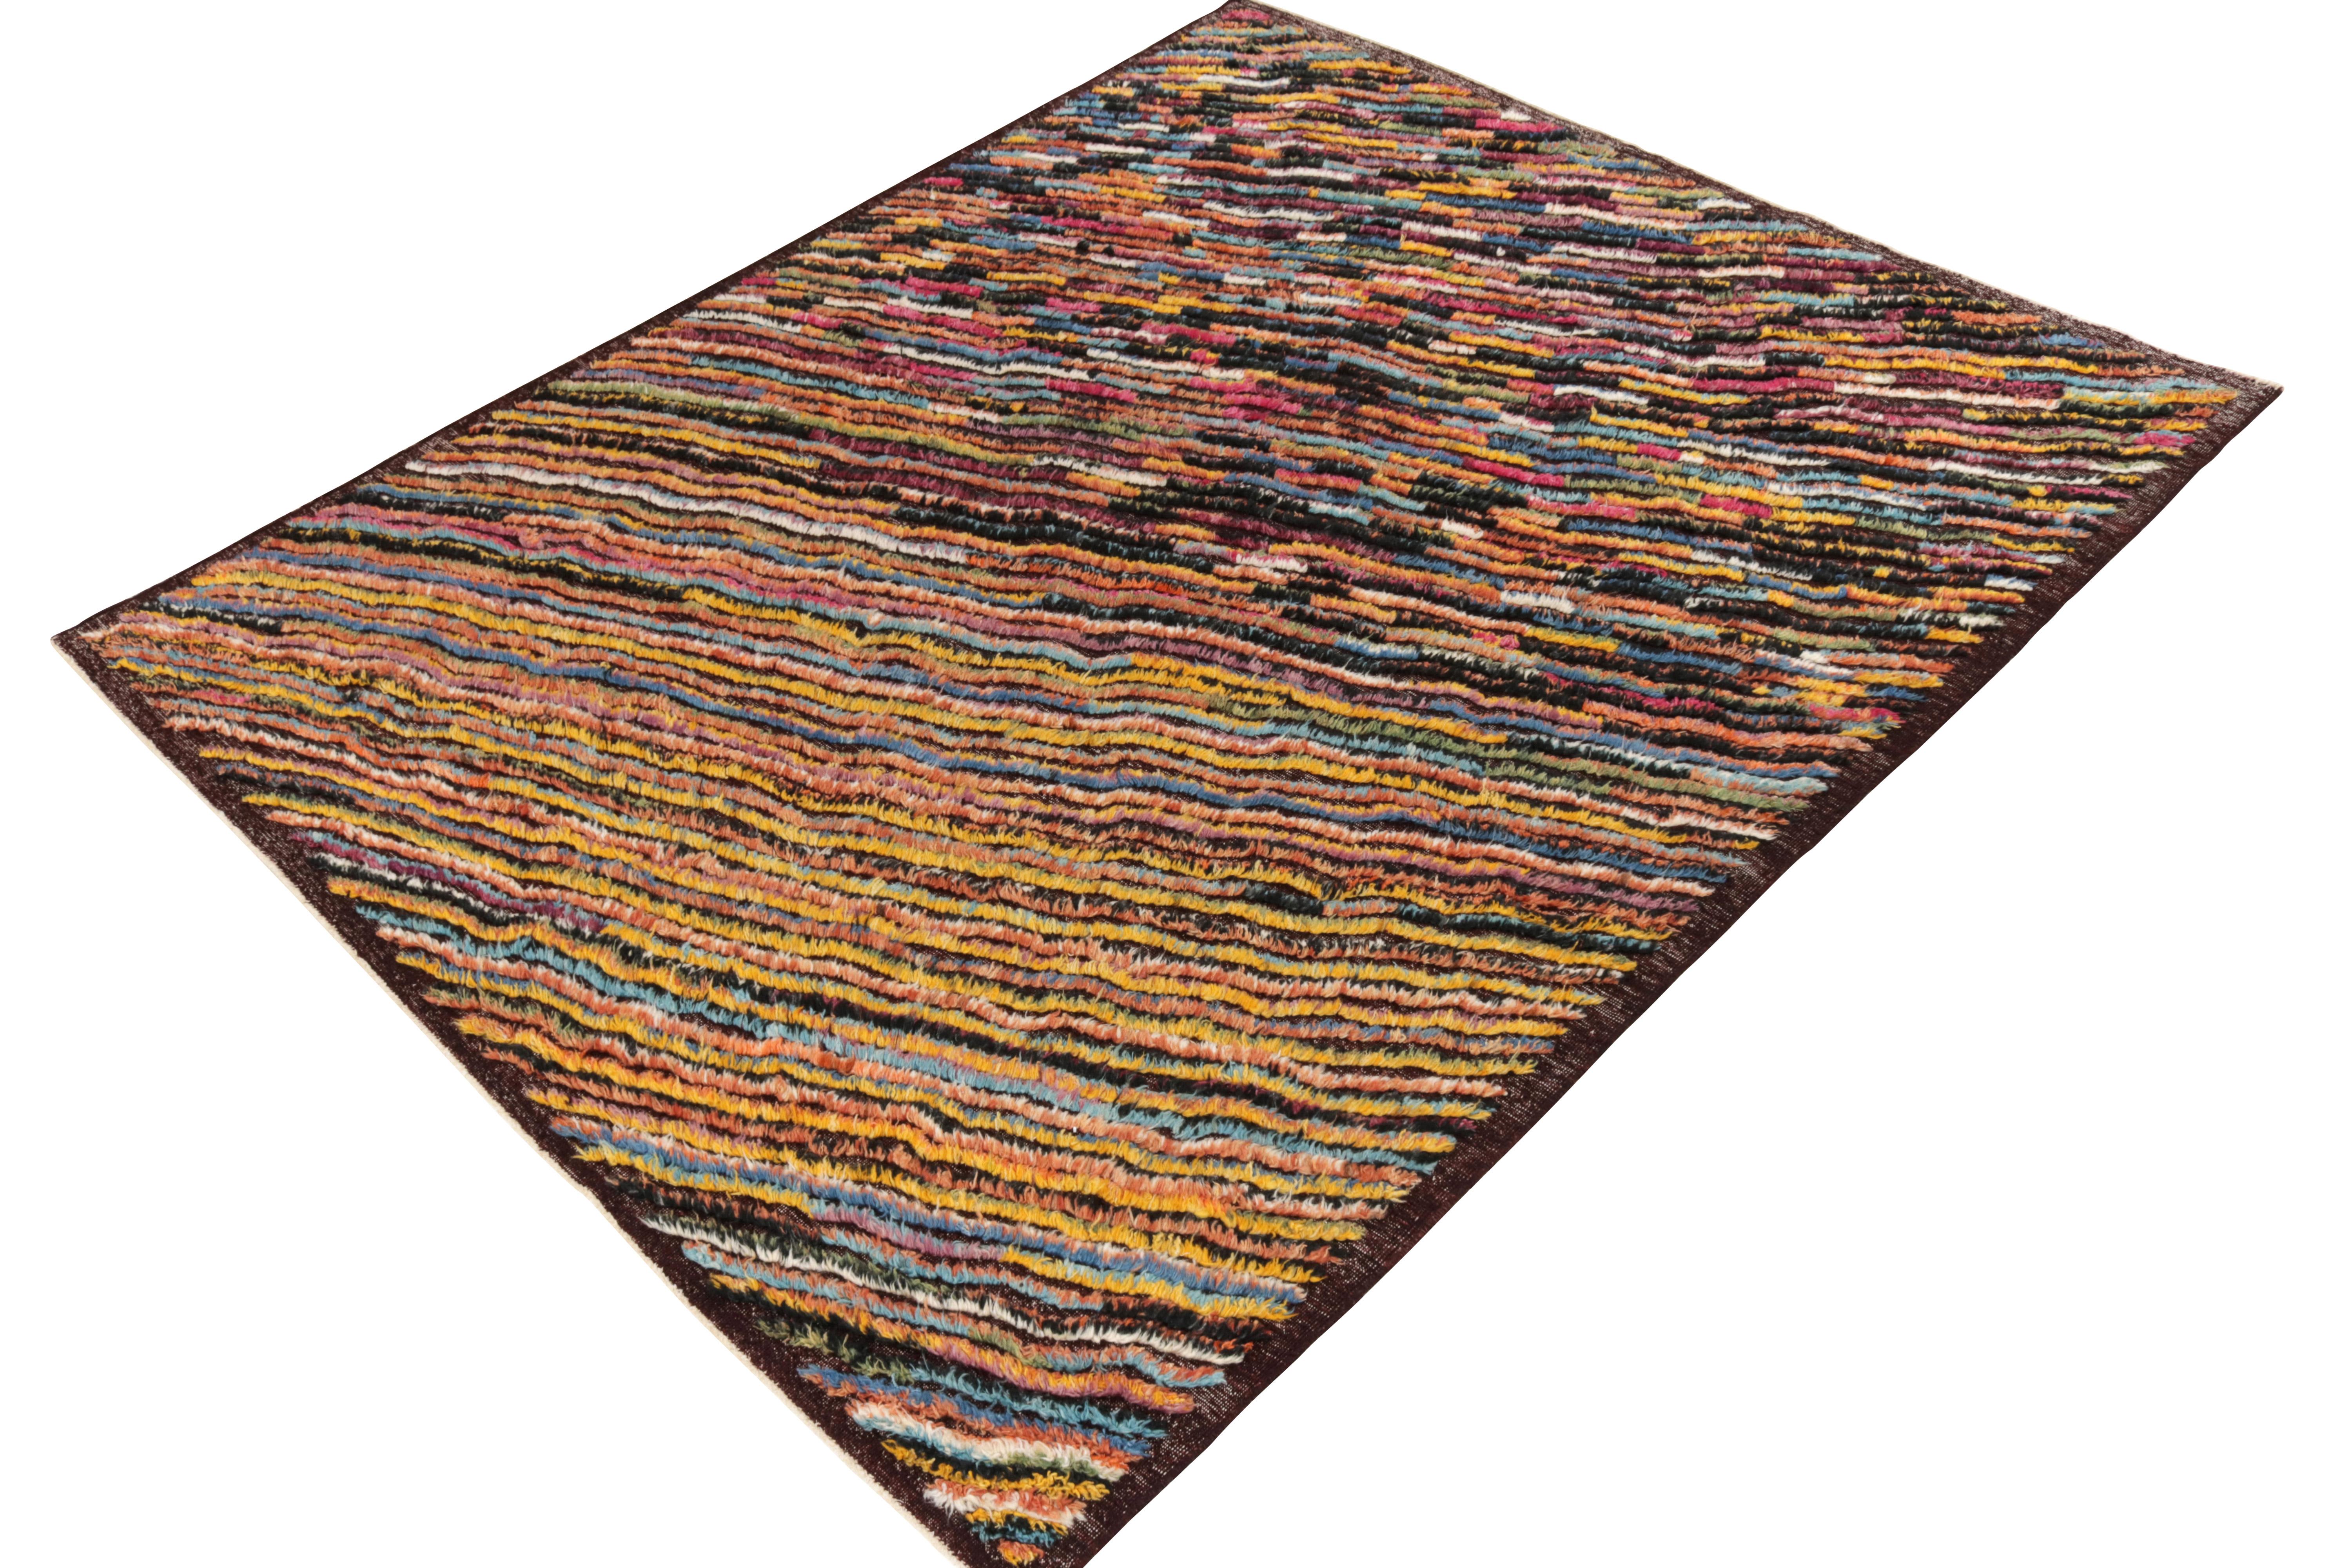 This contemporary 8x10 Kilim is a bold new addition to Rug & Kilim’s modern flat weave designs.

Handwoven in wool, this design favors a finely detailed play of textural stripes and polychromatic colors. Keen eyes will admire vibrant pinks, blues,